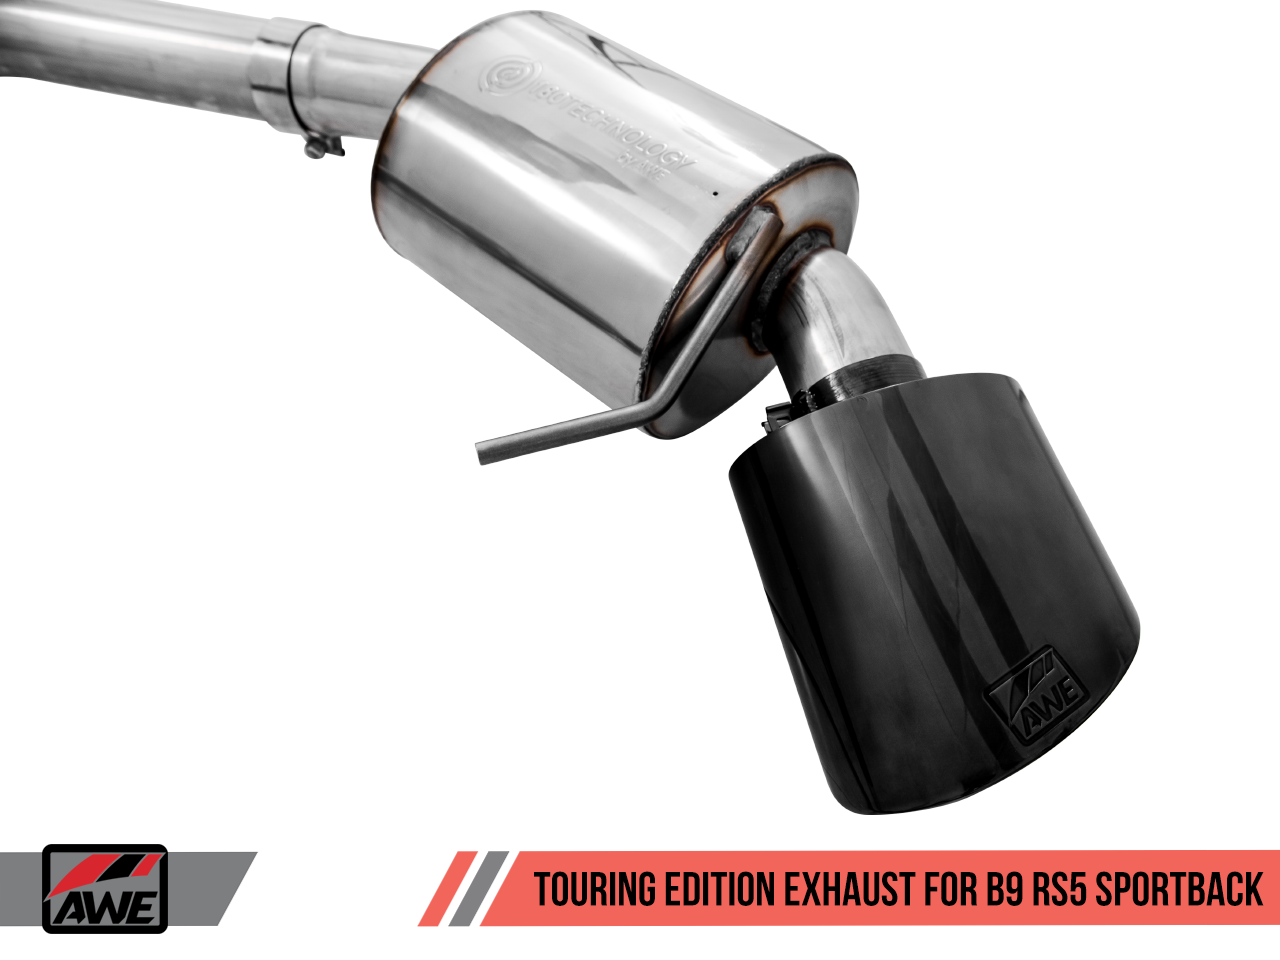 AWE Track Edition Exhaust for Audi B9 RS 5 Sportback - Non-Resonated - Diamond Black RS-style Tips - Motorsports LA